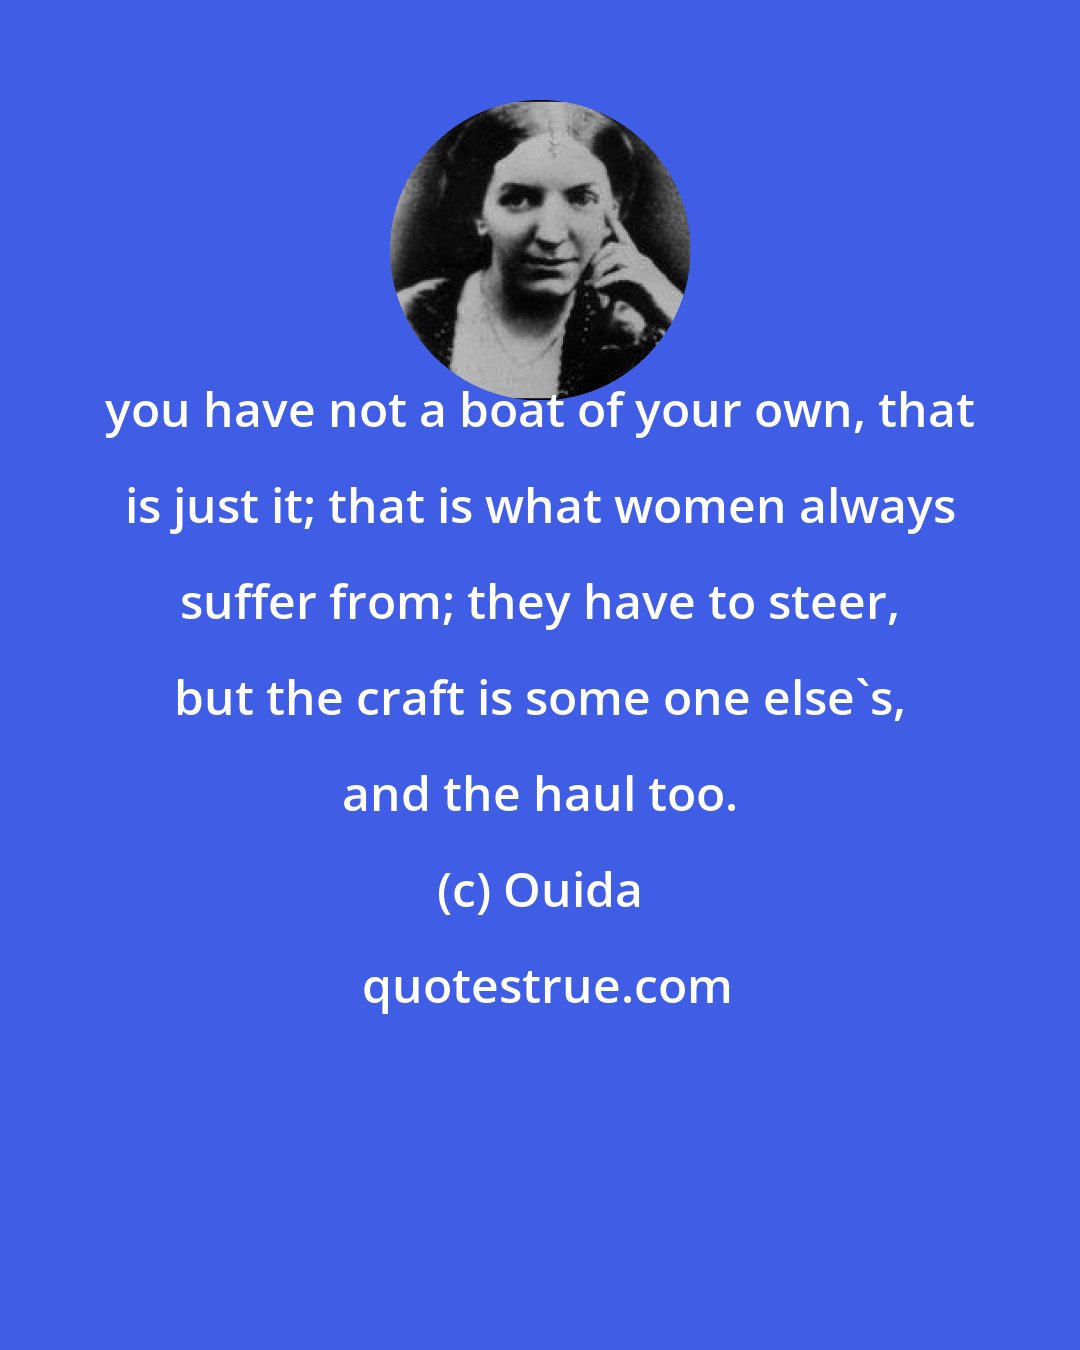 Ouida: you have not a boat of your own, that is just it; that is what women always suffer from; they have to steer, but the craft is some one else's, and the haul too.